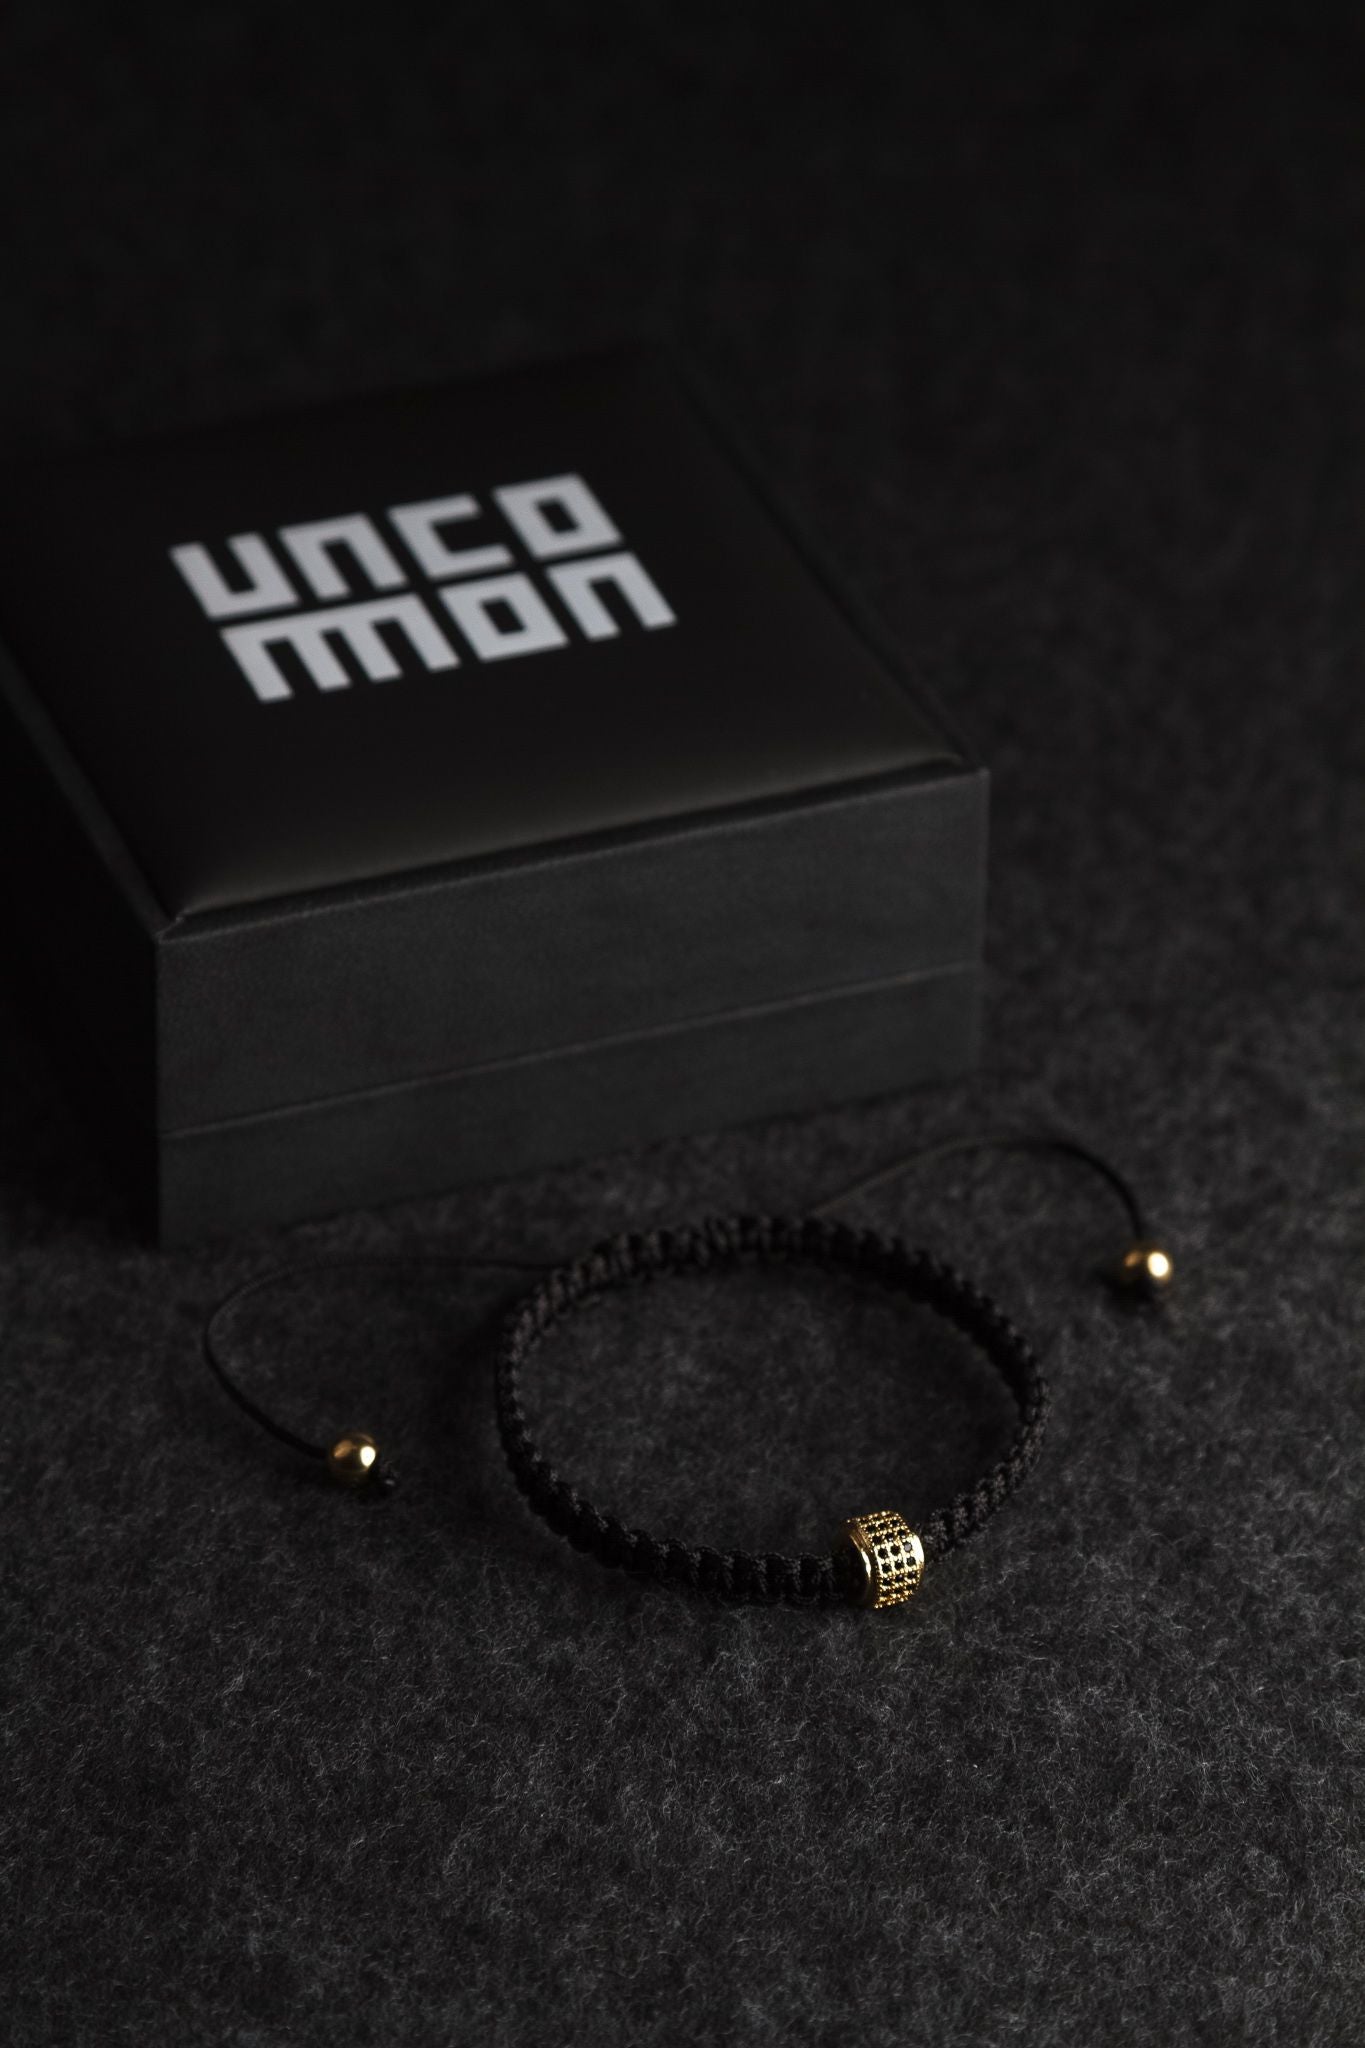 UNCOMMON Men's Woven Bracelet with Single Gold Charm and Accent Beads